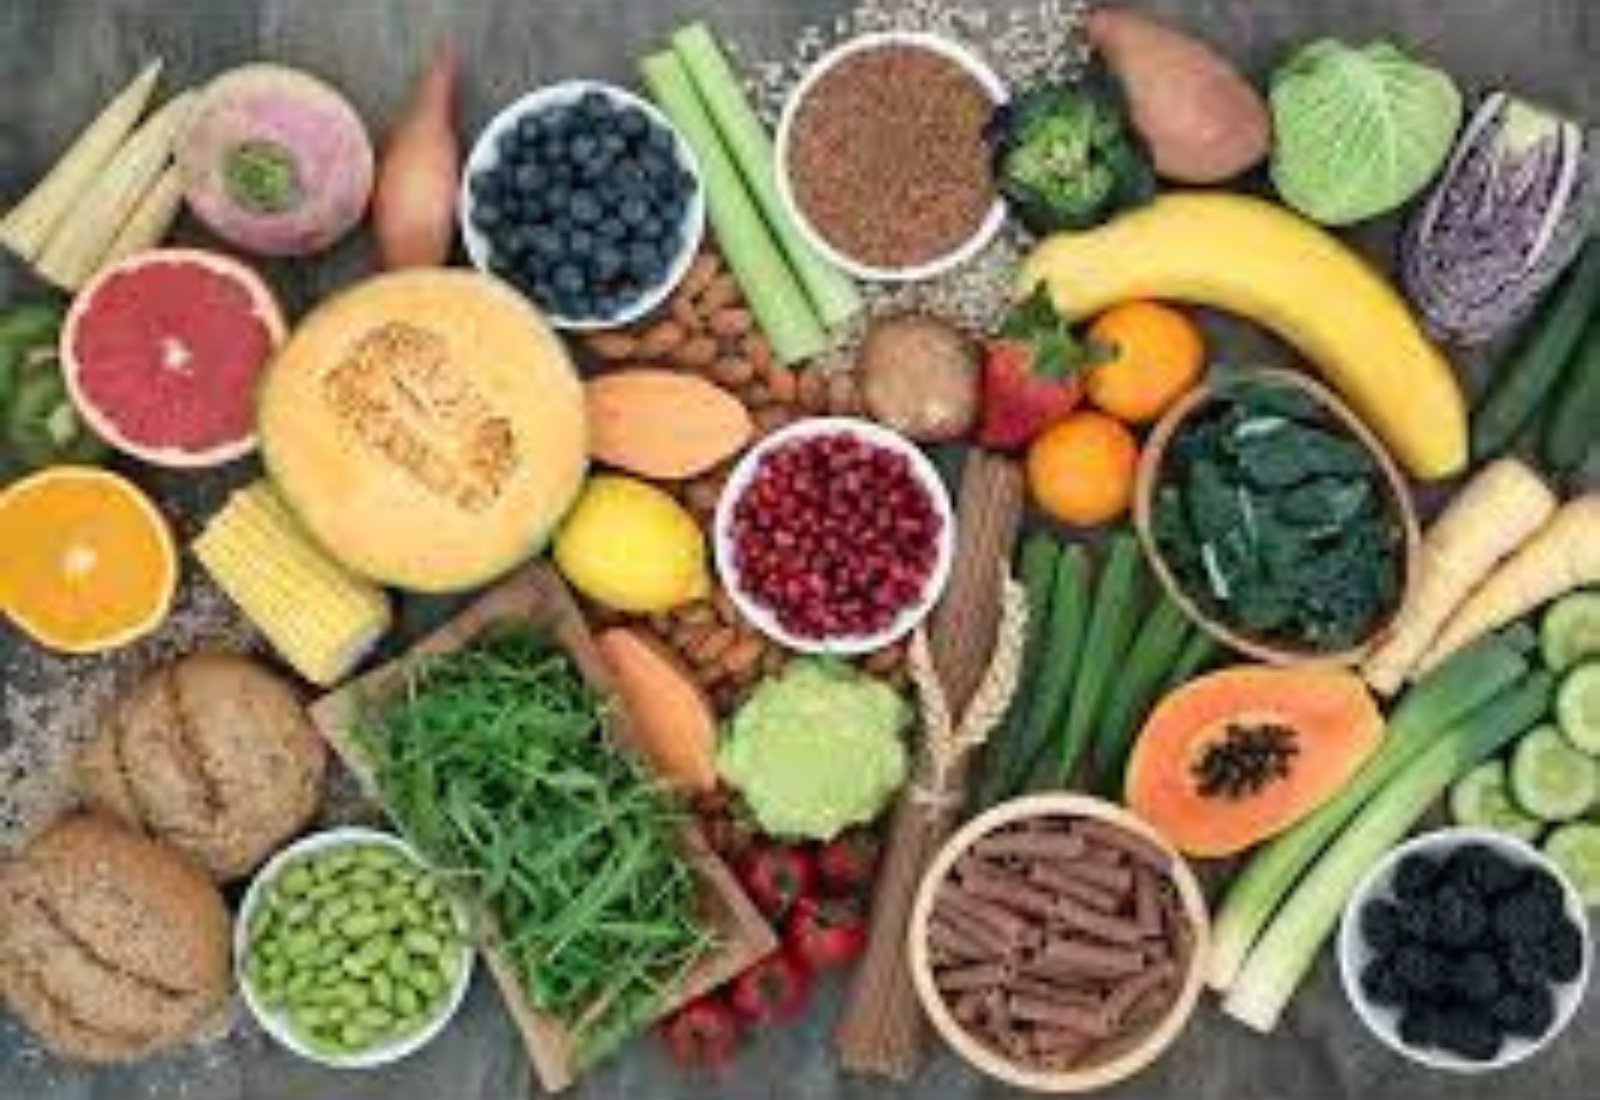 Beyond Mirror - Nutrition and Wellness - Top 7 nutrient-dense fruits and vegetables - 1